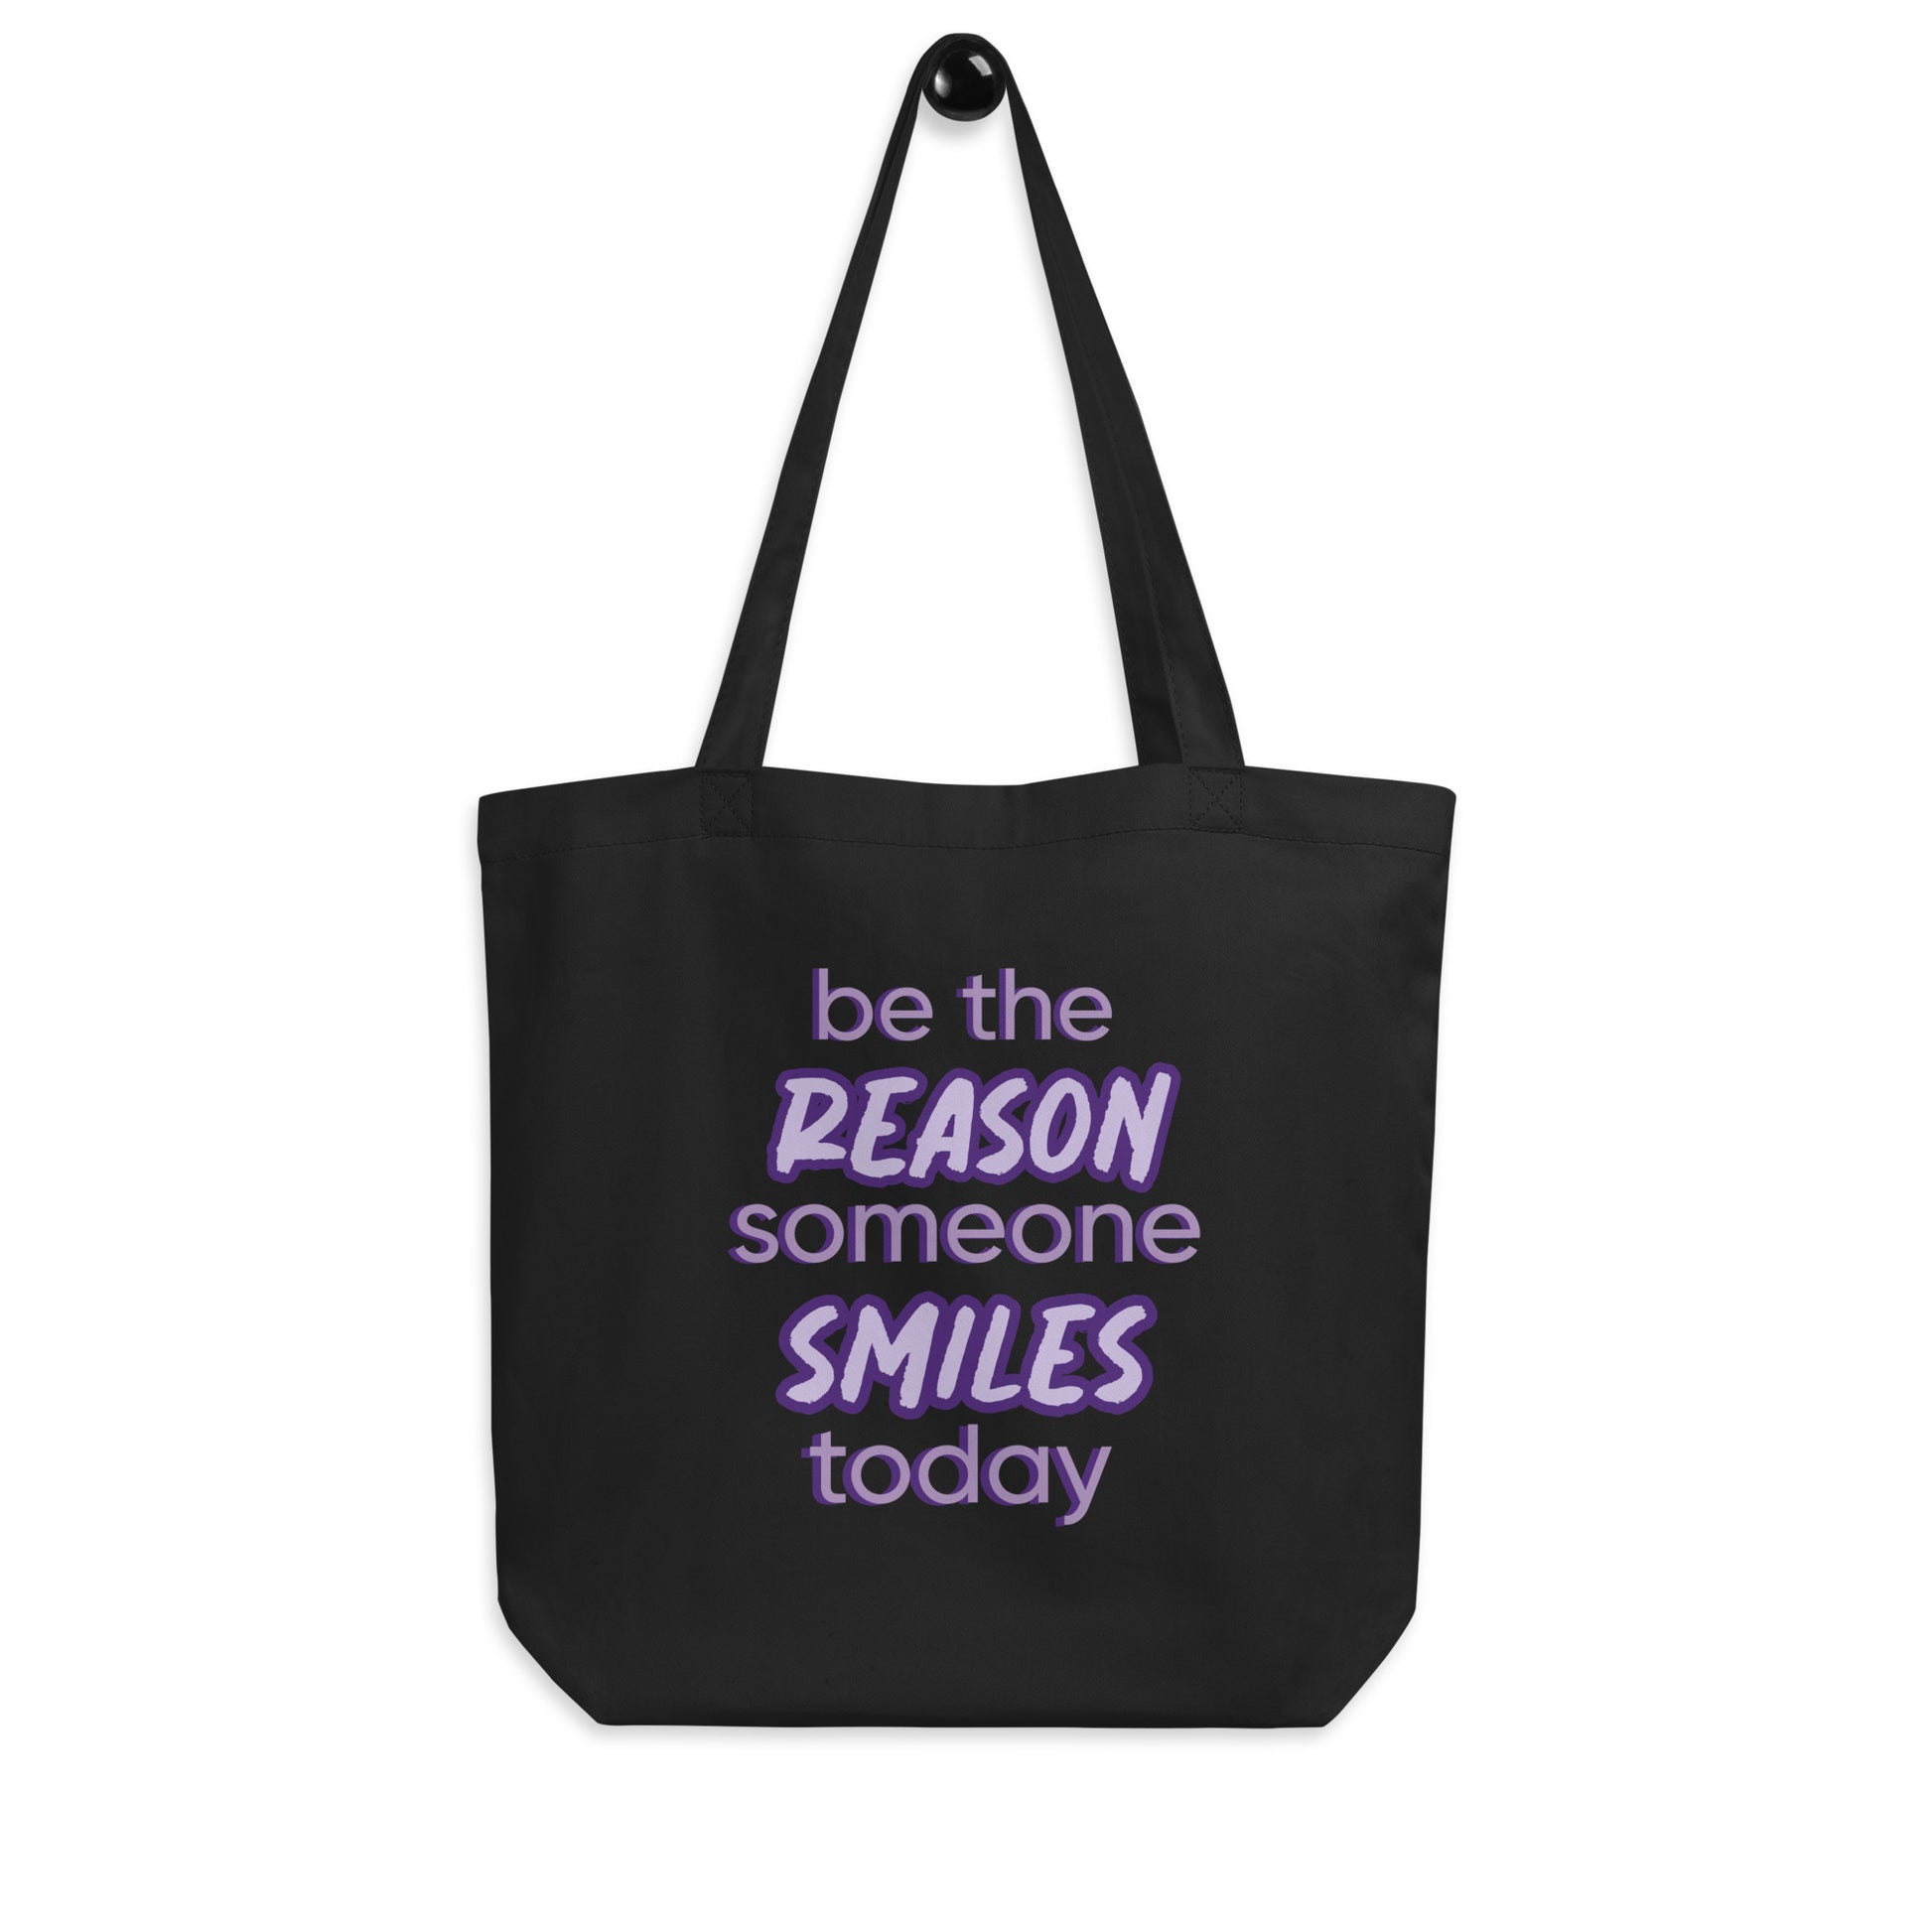 Black tote bag with the quote "be the reason someone smiles today" in purple on it. 